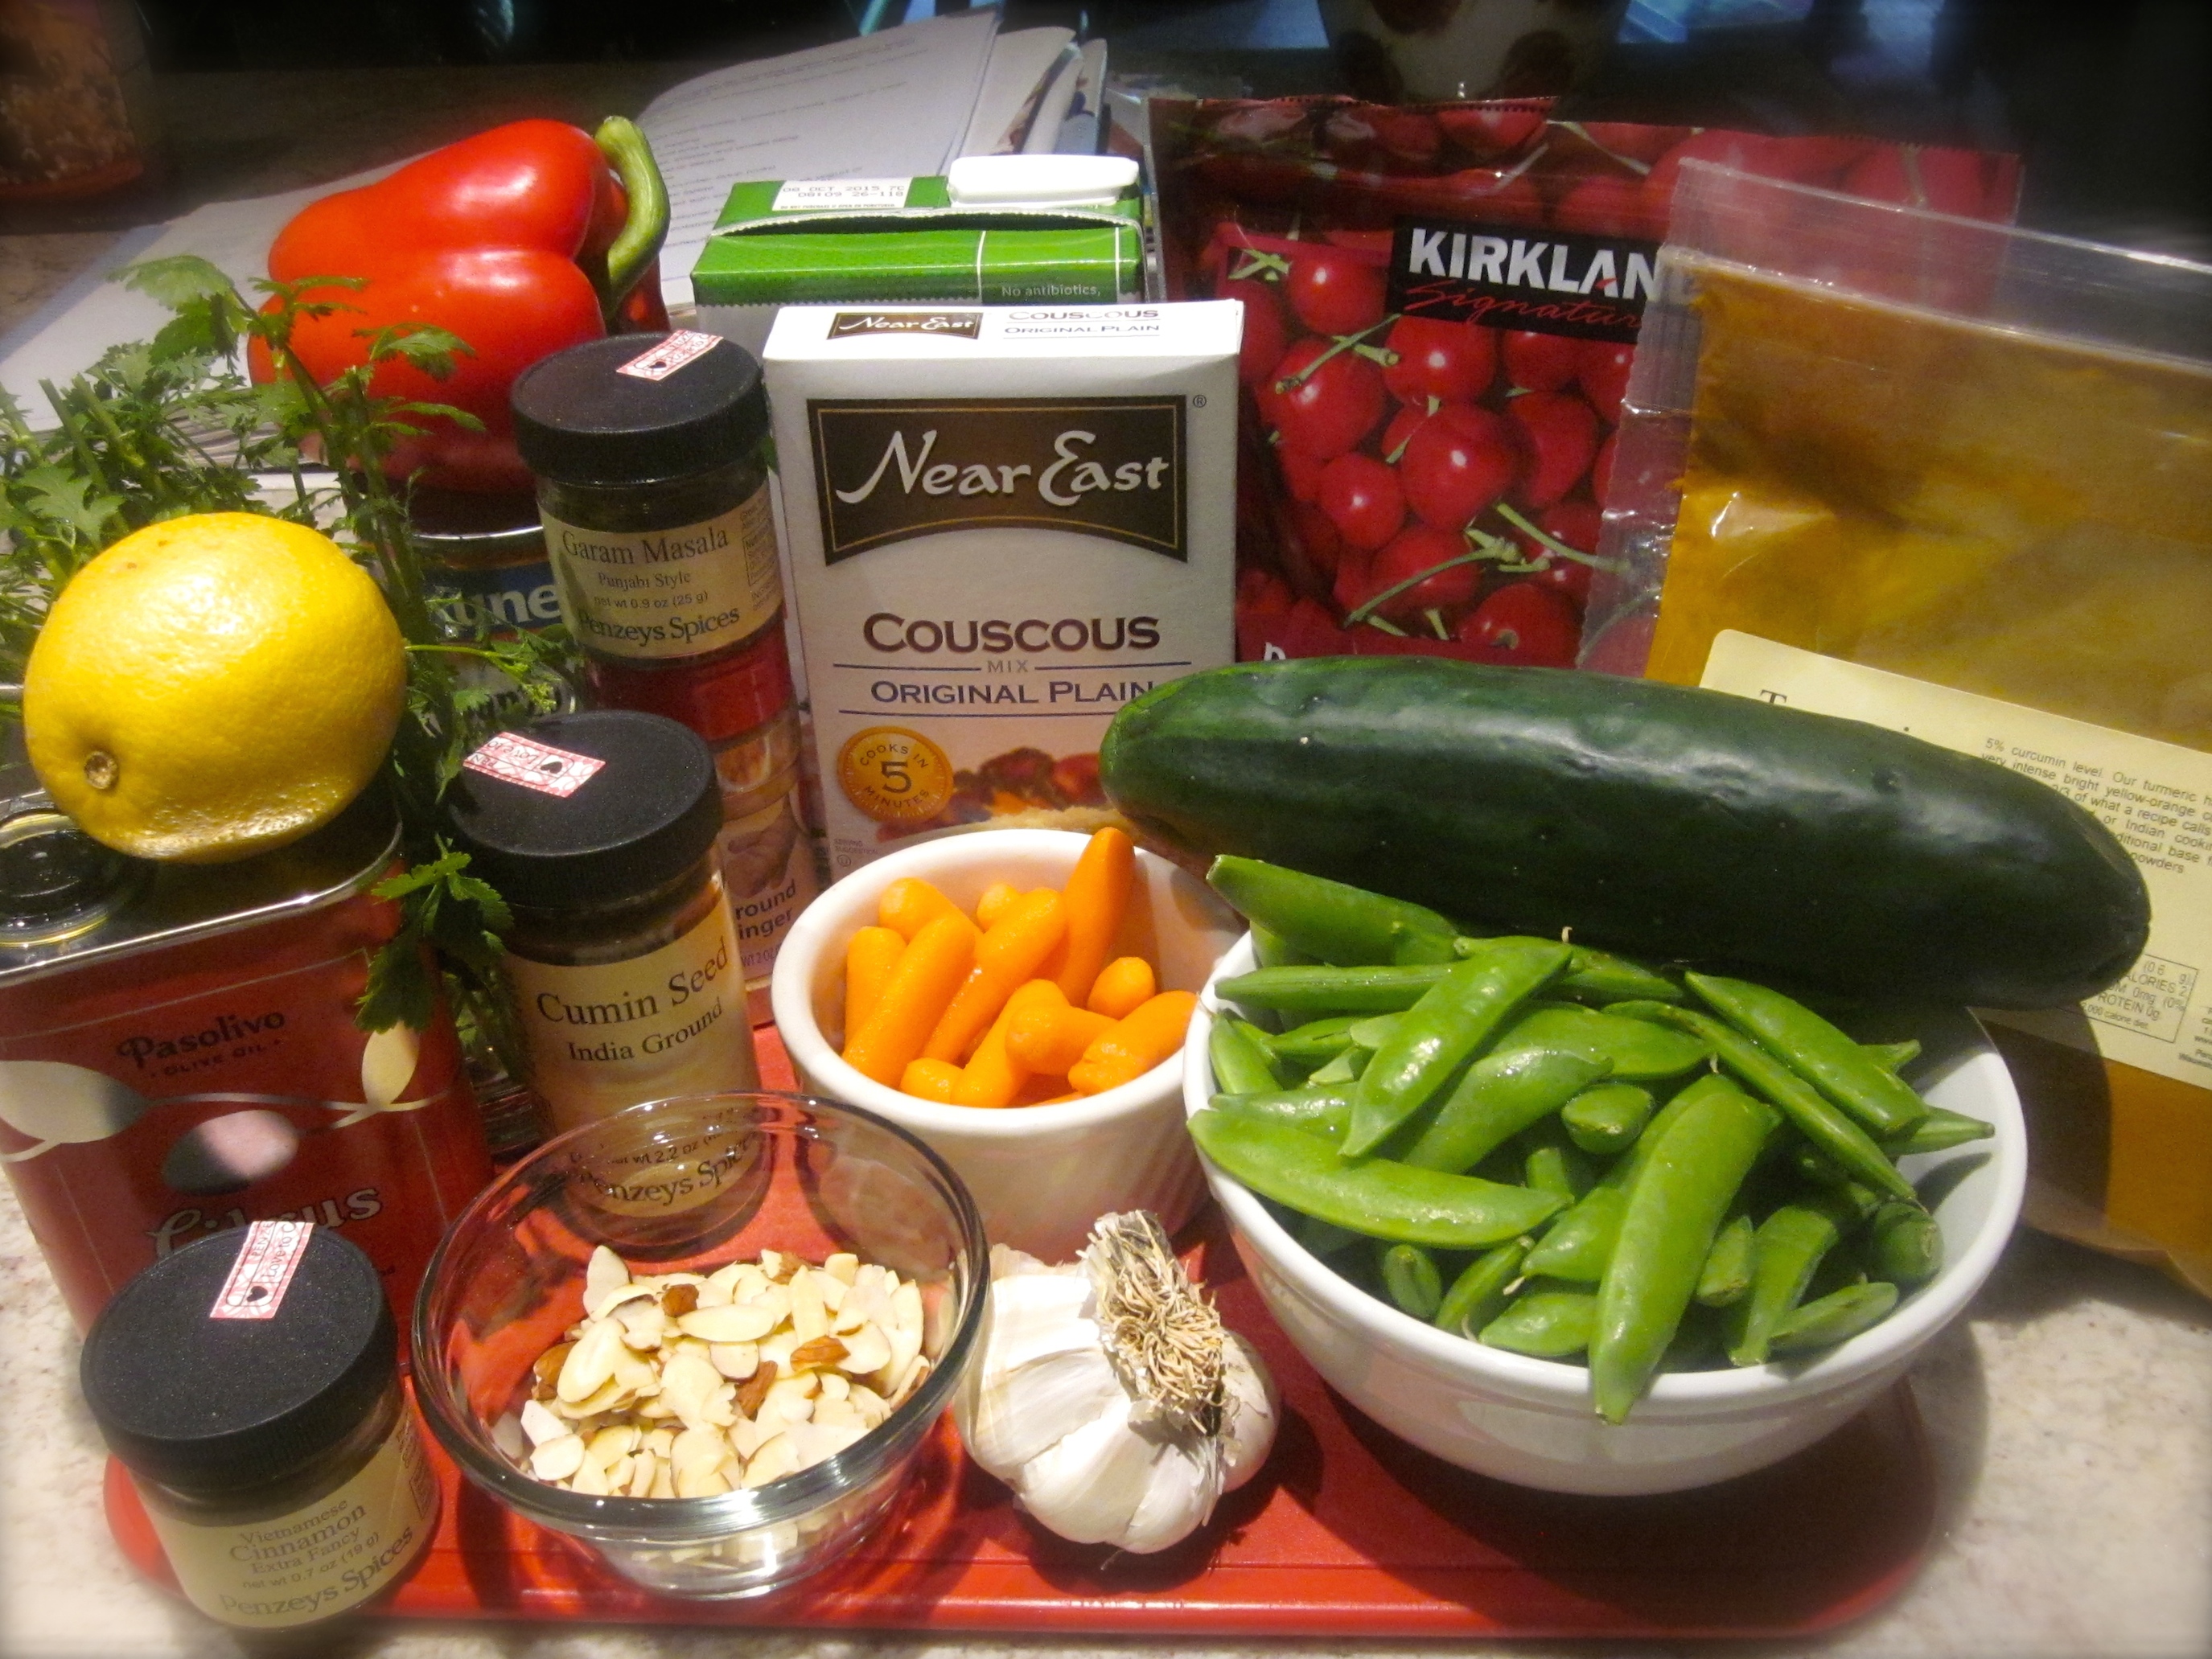 Mise en Place, the ingredients needed for the salad